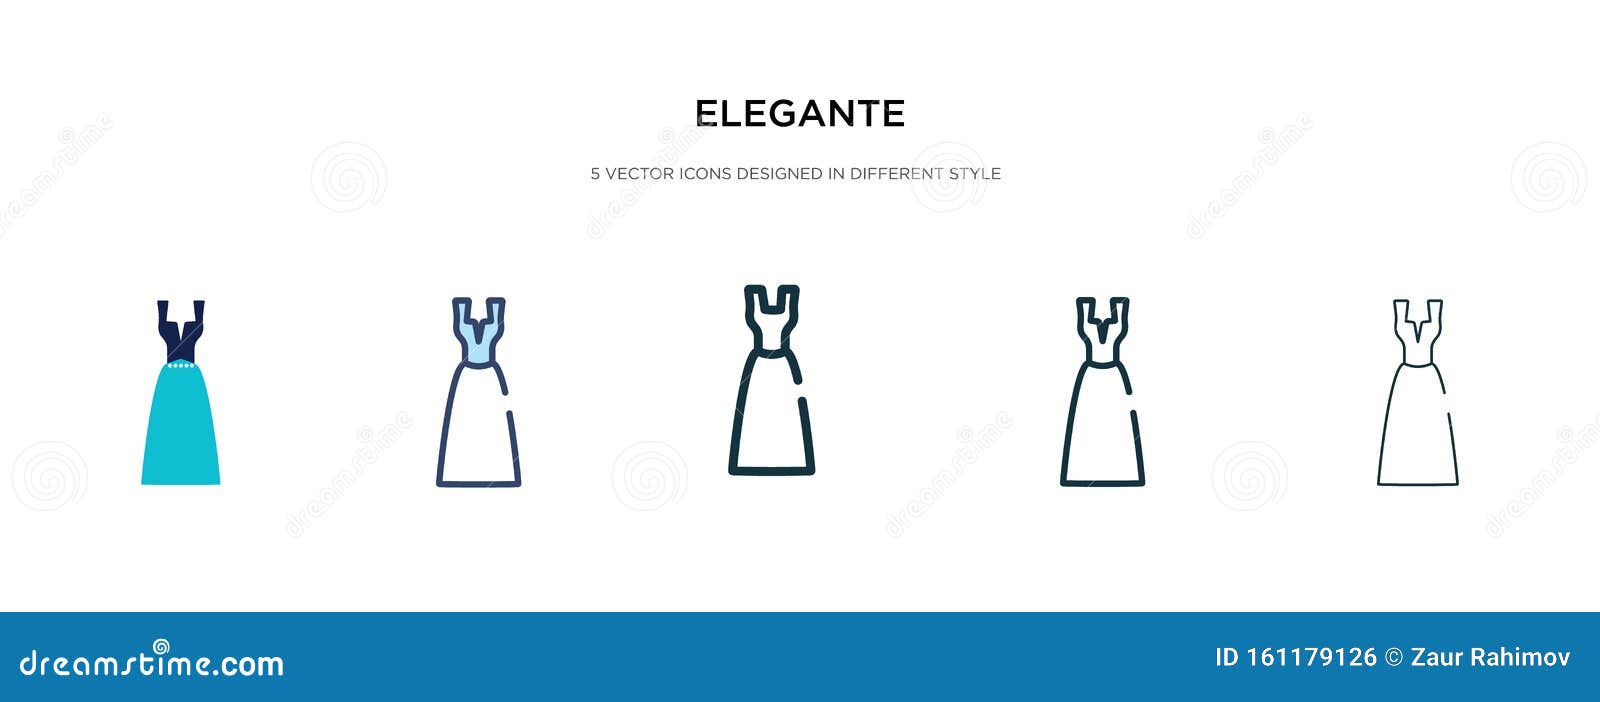 elegante icon in different style  . two colored and black elegante  icons ed in filled, outline,